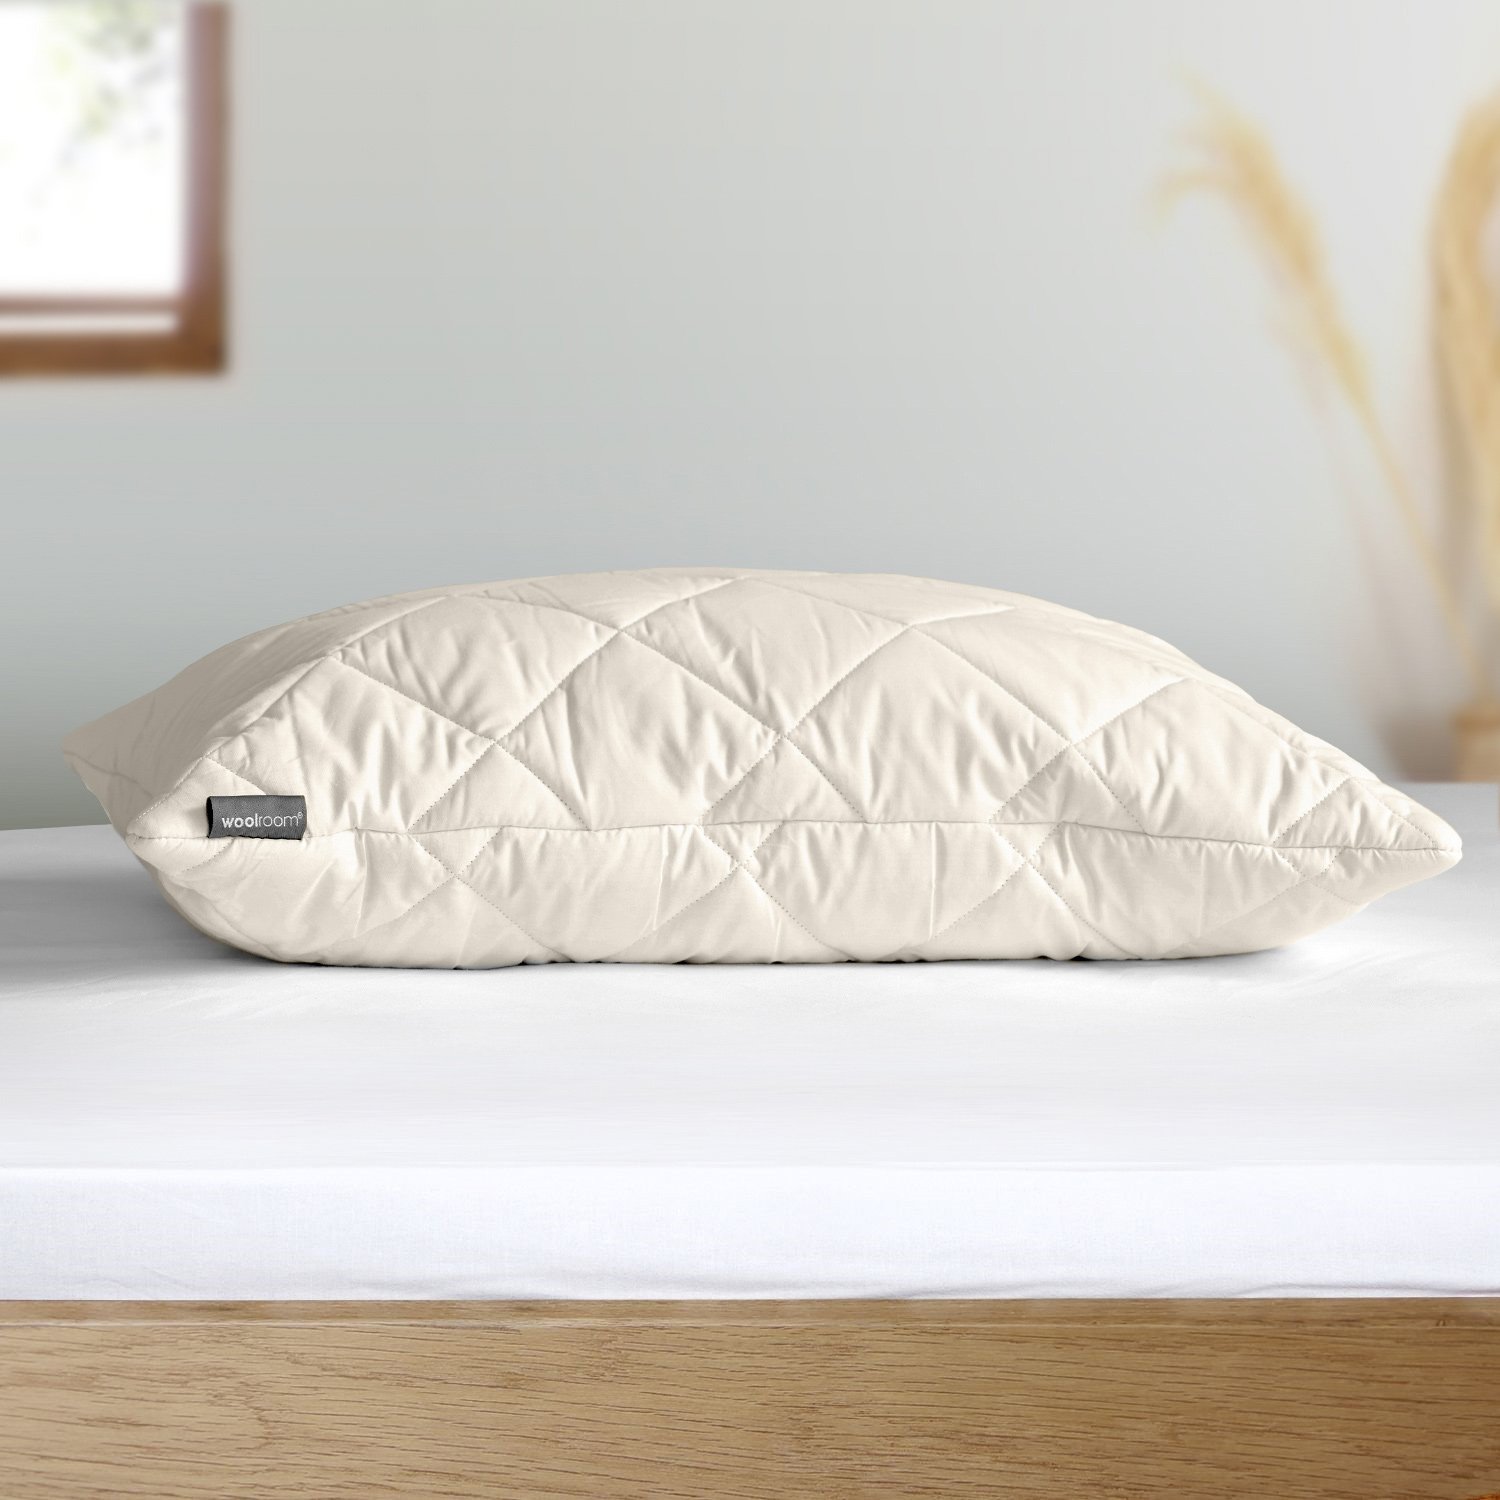 https://www.thewoolroom.com/images/products/large/US_0103DELWASHPILLOW.jpg